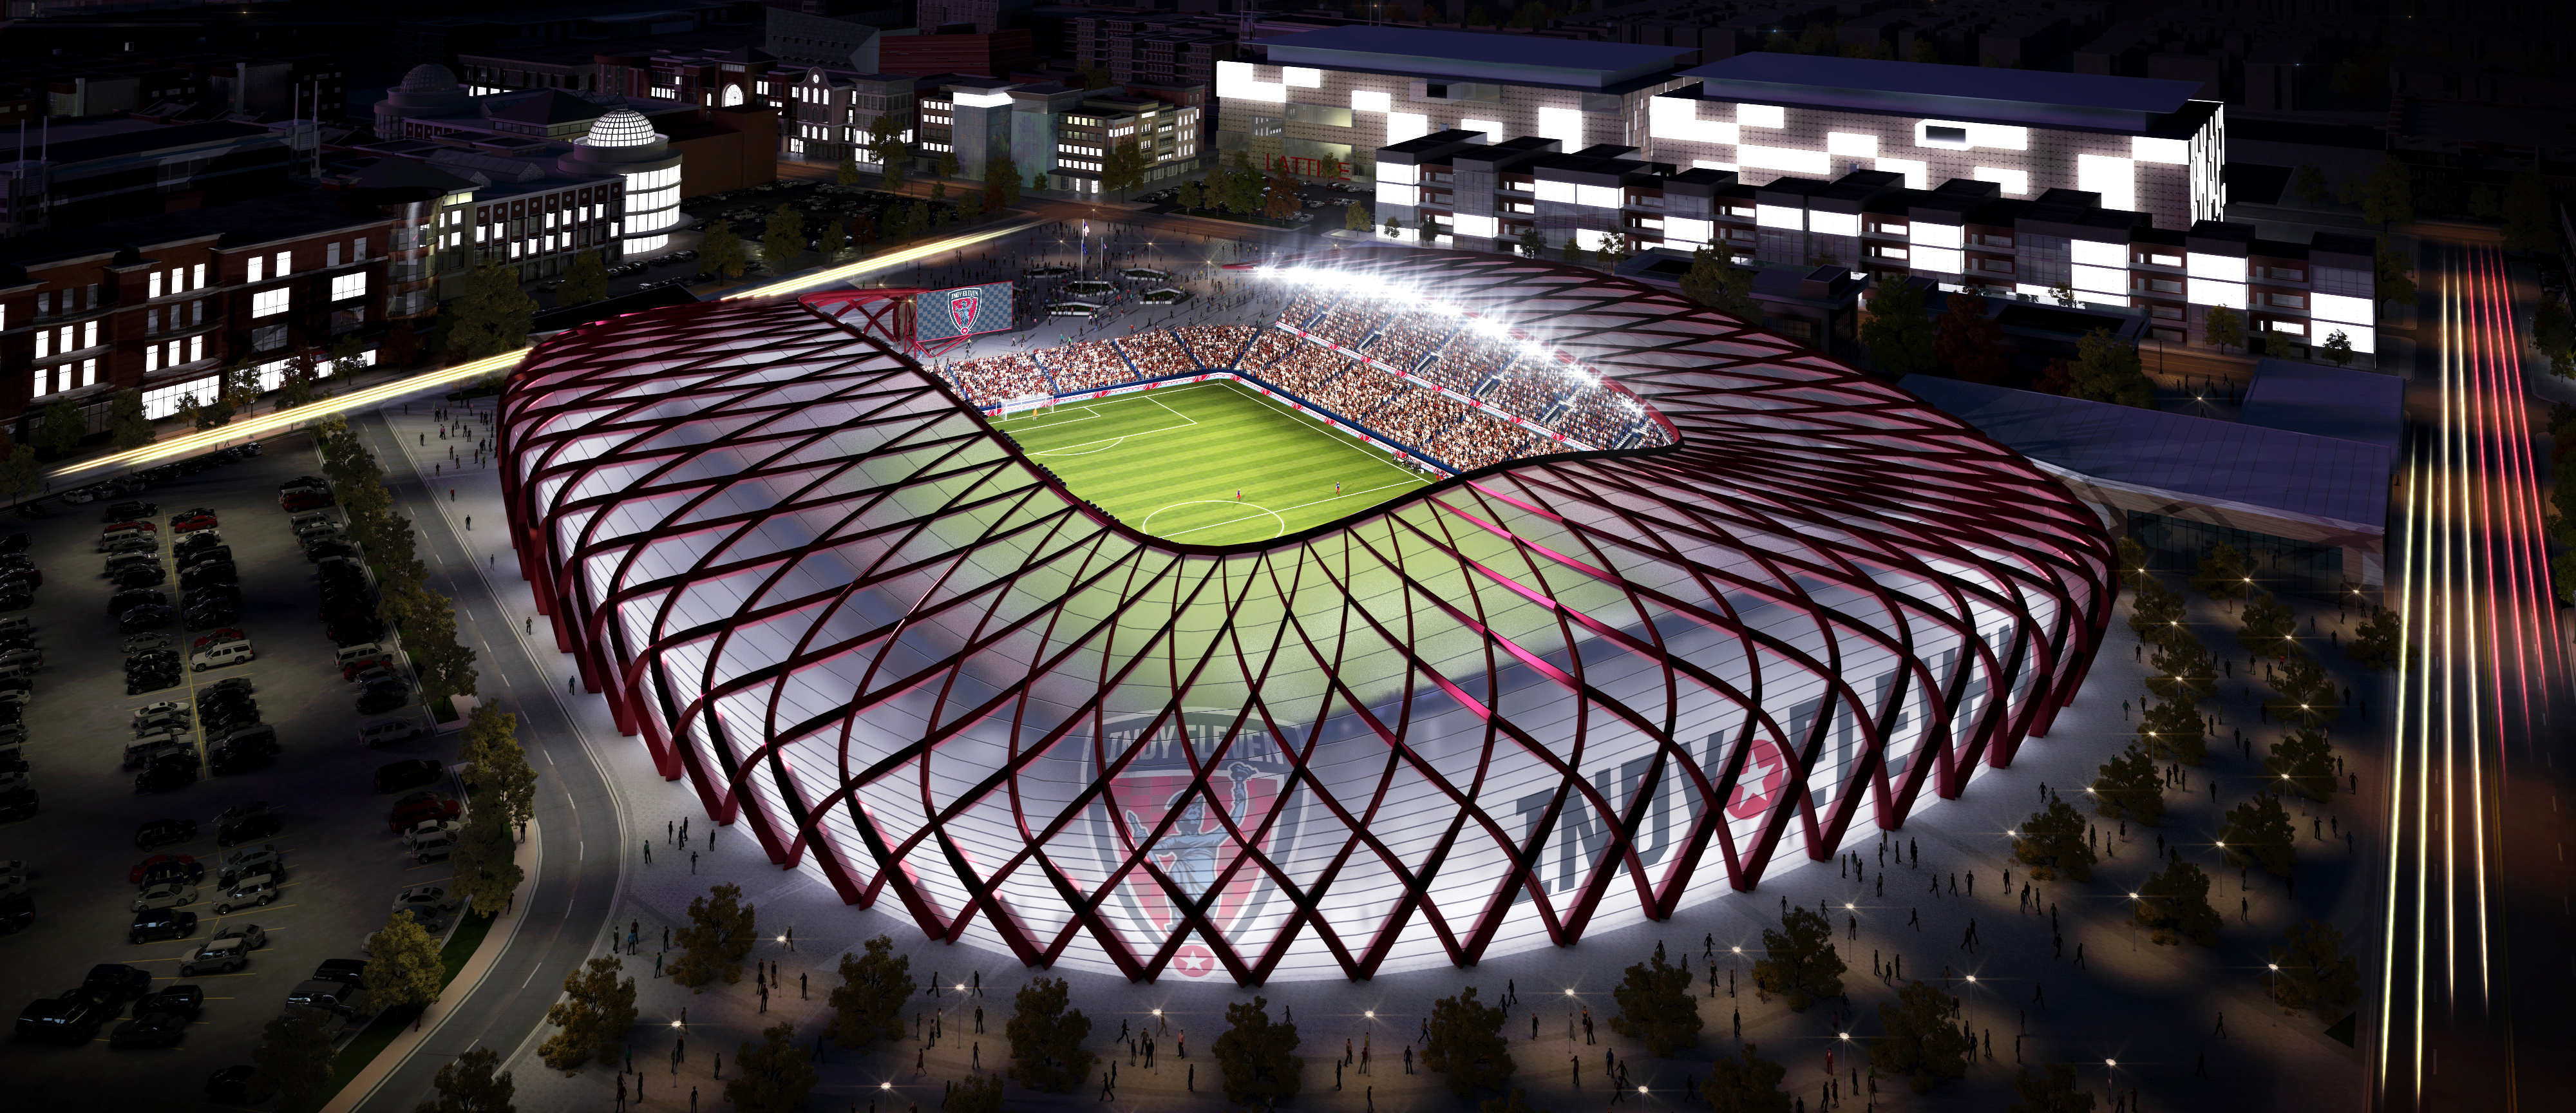 MLS Soccer News: Complete List of Cities of Radar for MLS Expansion